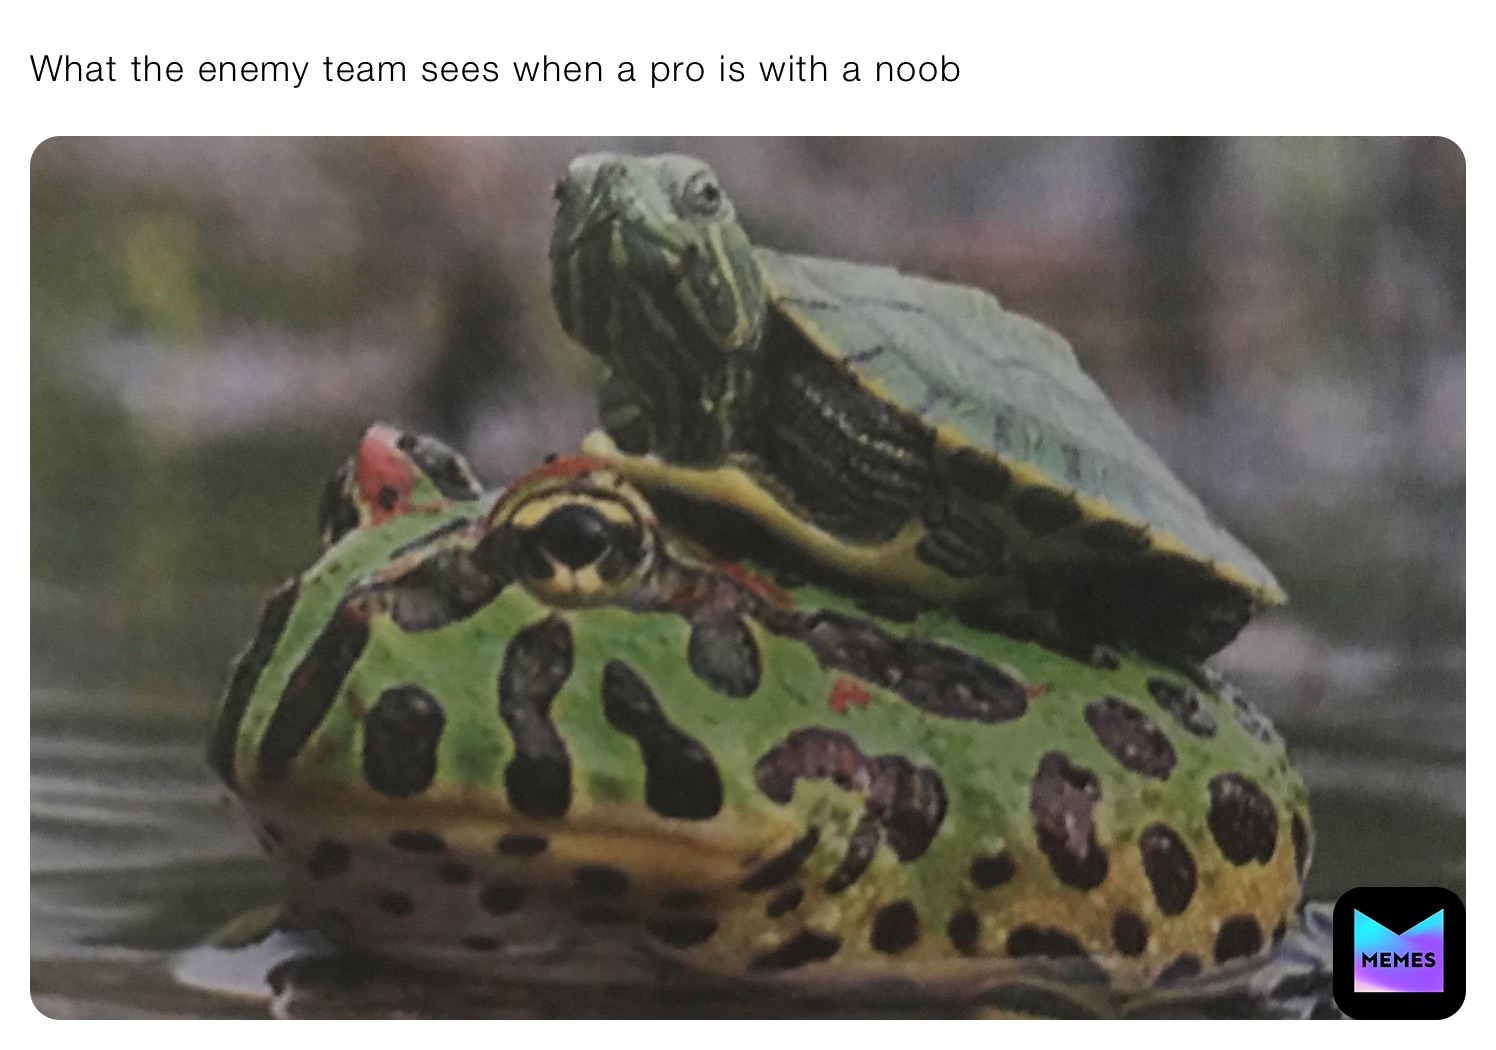 What the enemy team sees when a pro is with a noob